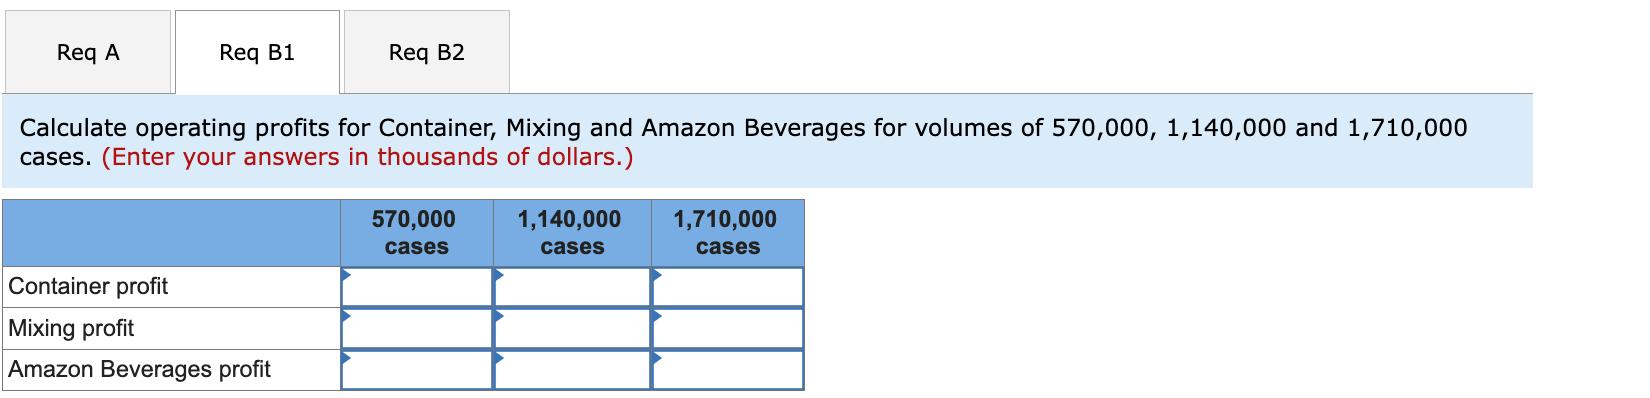 Req A Req B1 Req B2 Calculate operating profits for Container, Mixing and Amazon Beverages for volumes of